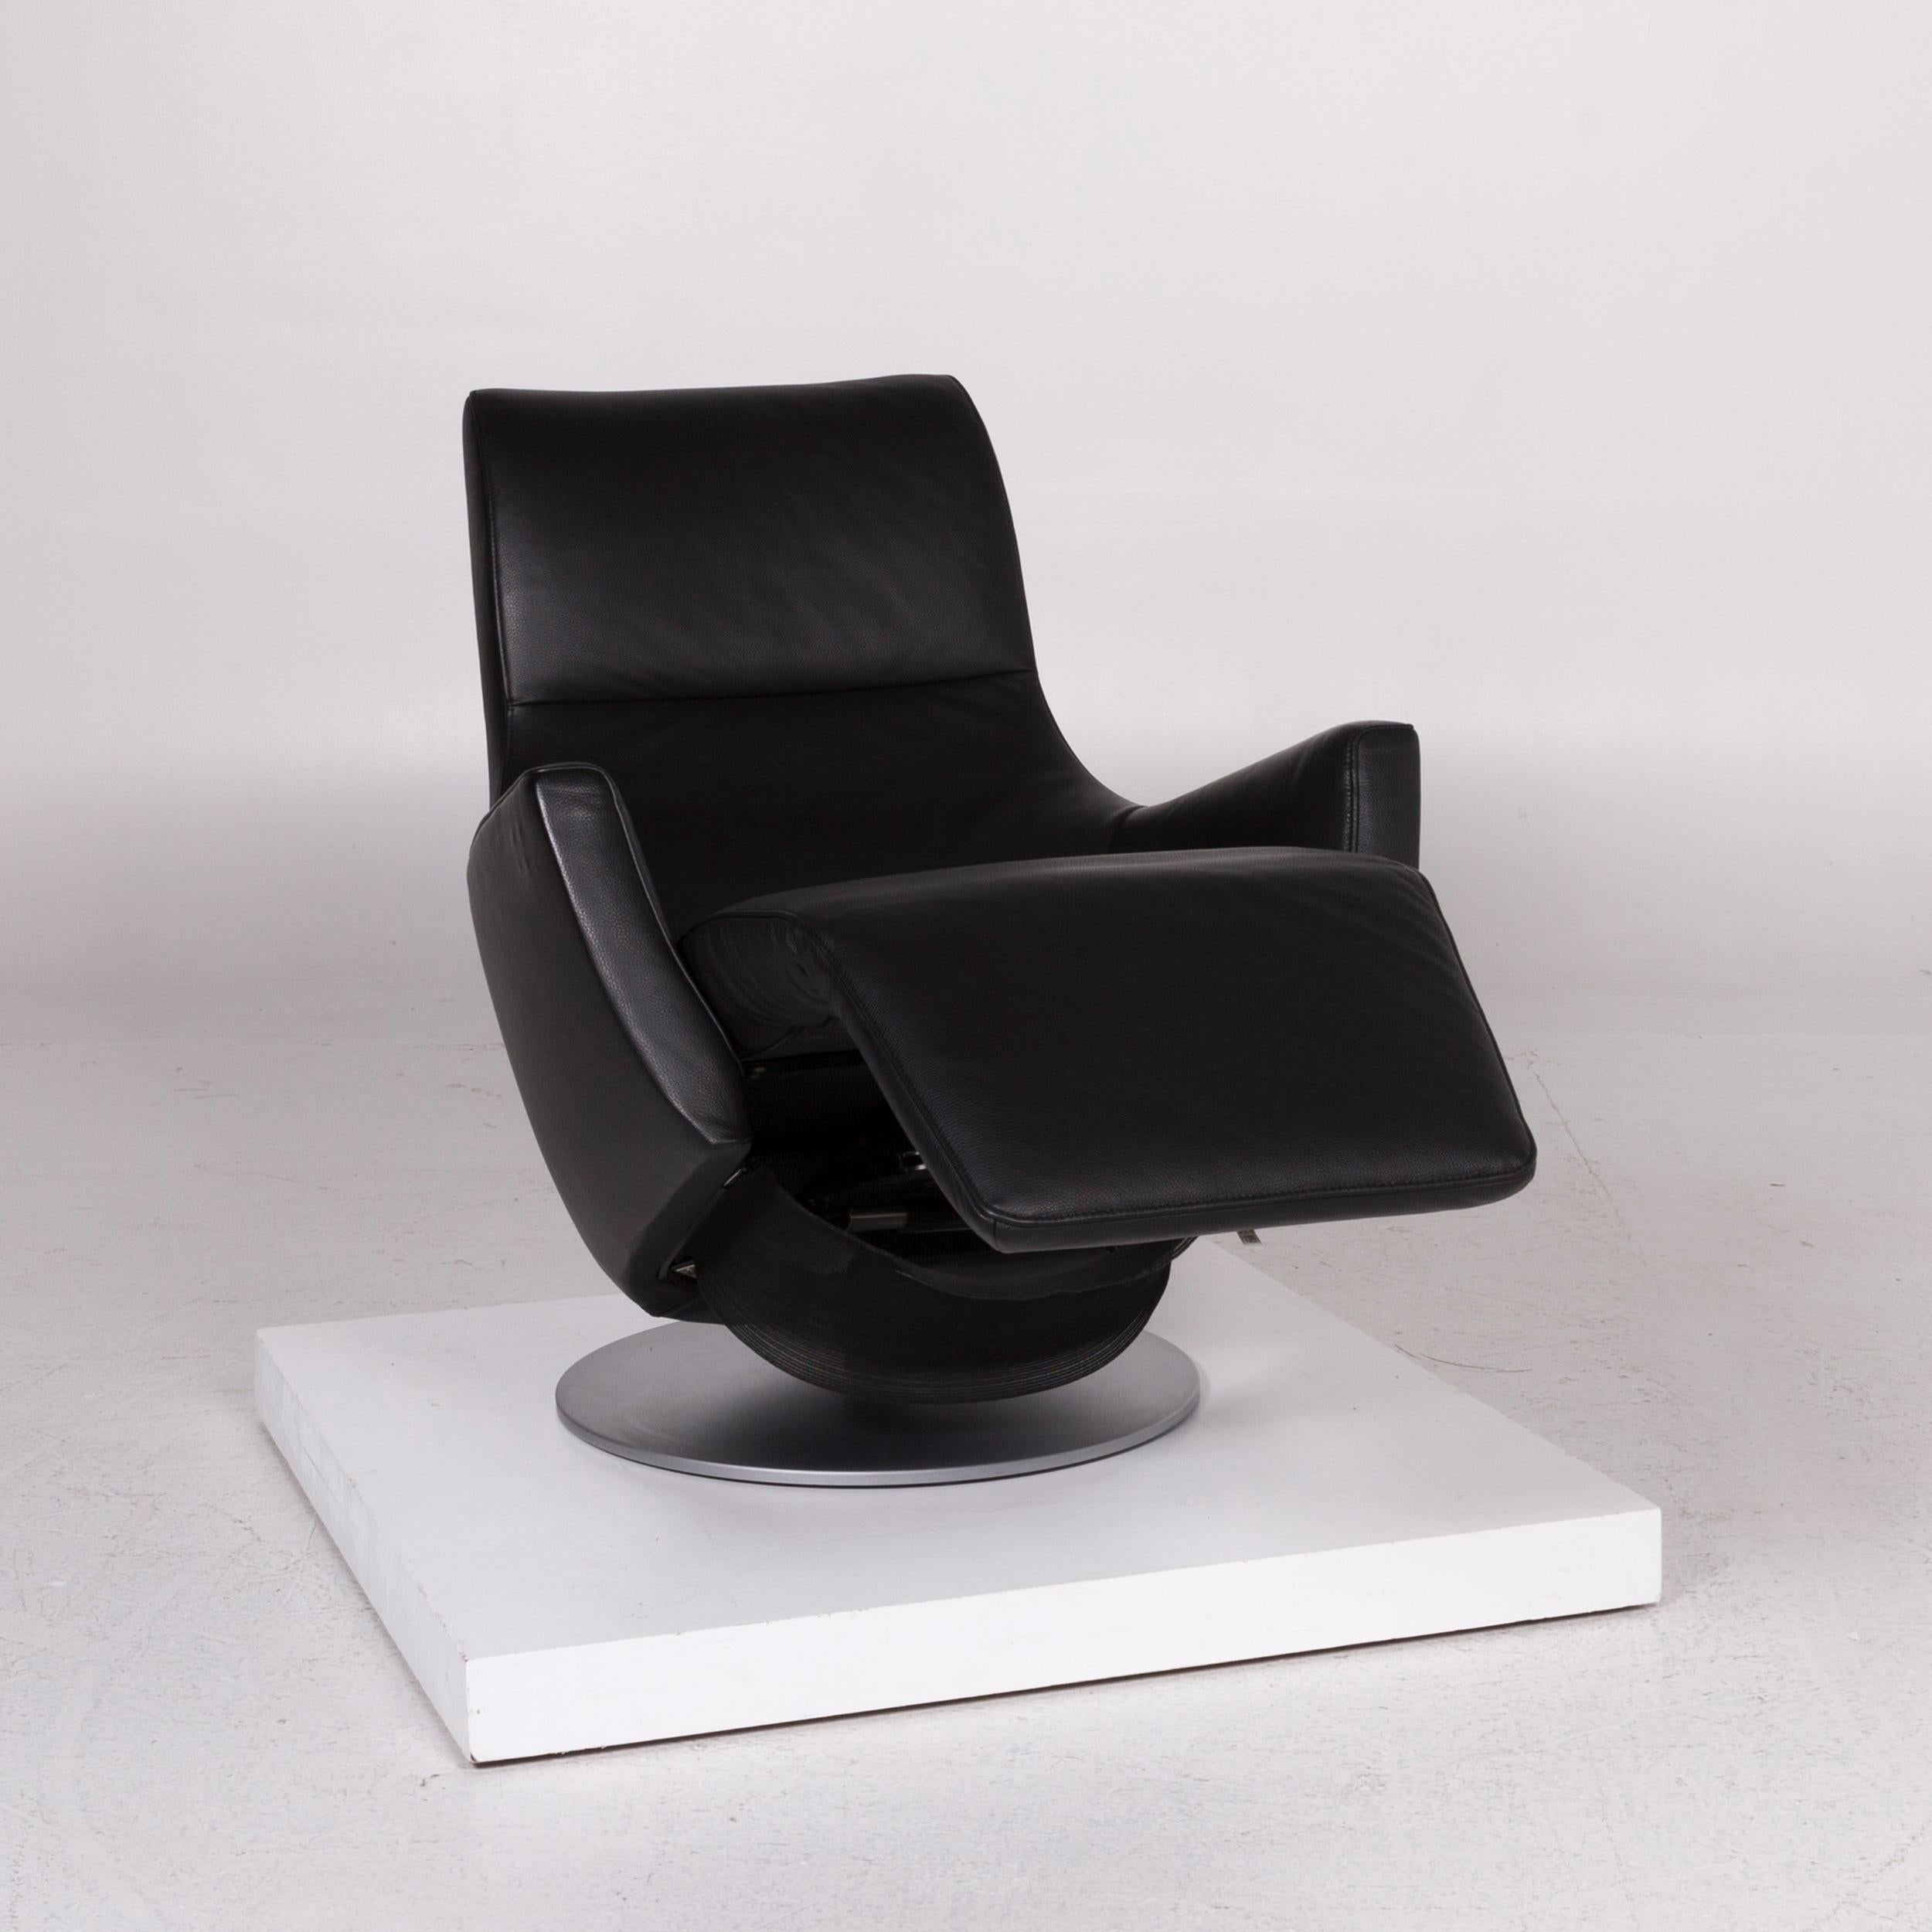 We bring to you a FSM leather armchair black incl. function.
 

 Product measurements in centimeters:
 

Depth 94
Width 76
Height 106
Seat-height 49
Rest-height 60
Seat-depth 51
Seat-width 58
Back-height 64.

 